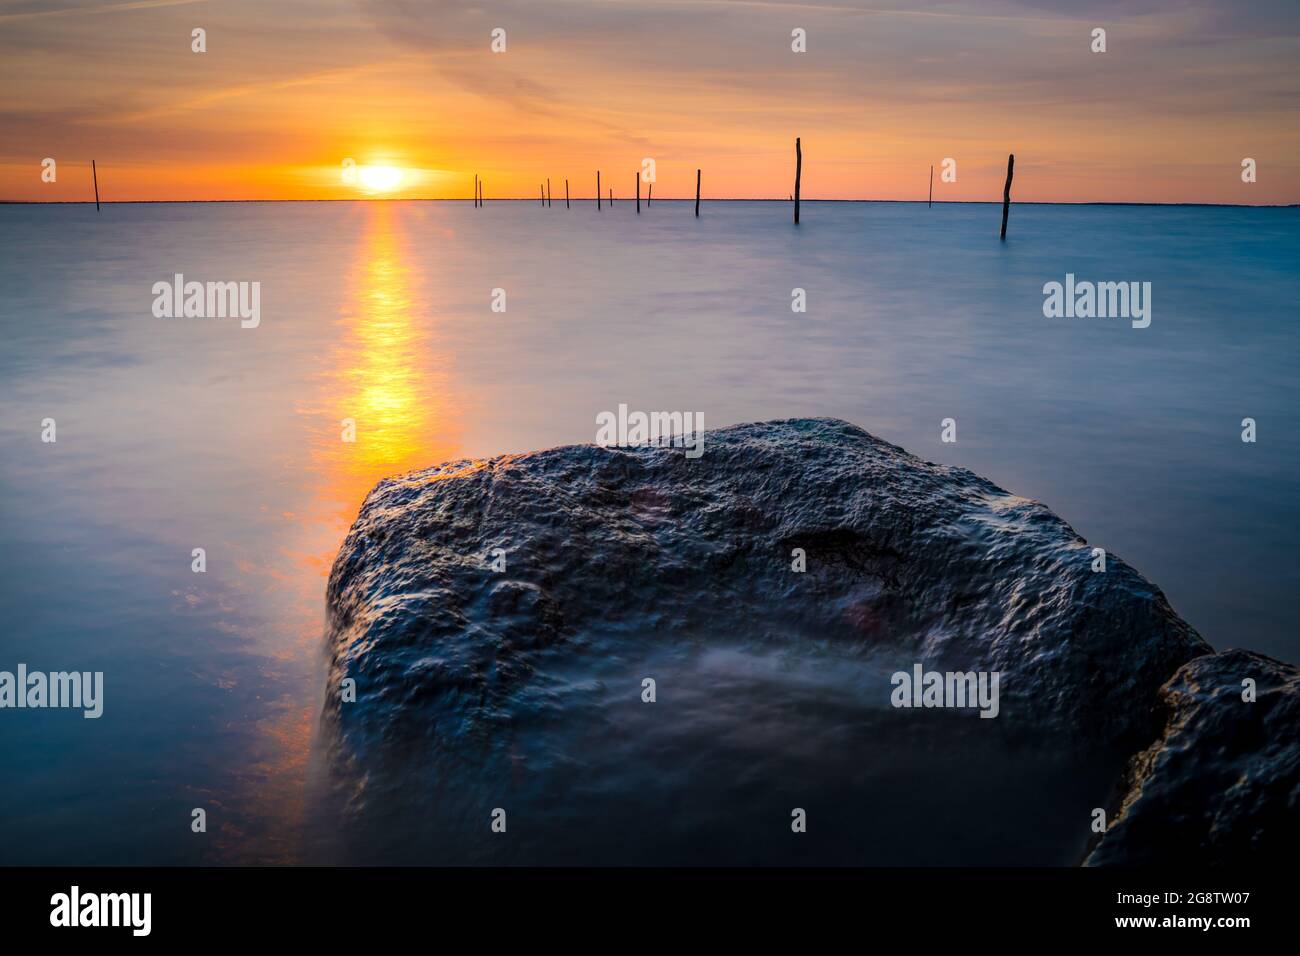 https://c8.alamy.com/comp/2G8TW07/beautiful-sunset-view-at-the-lake-ijssel-with-fishing-net-poles-in-flevoland-the-netherlands-2G8TW07.jpg